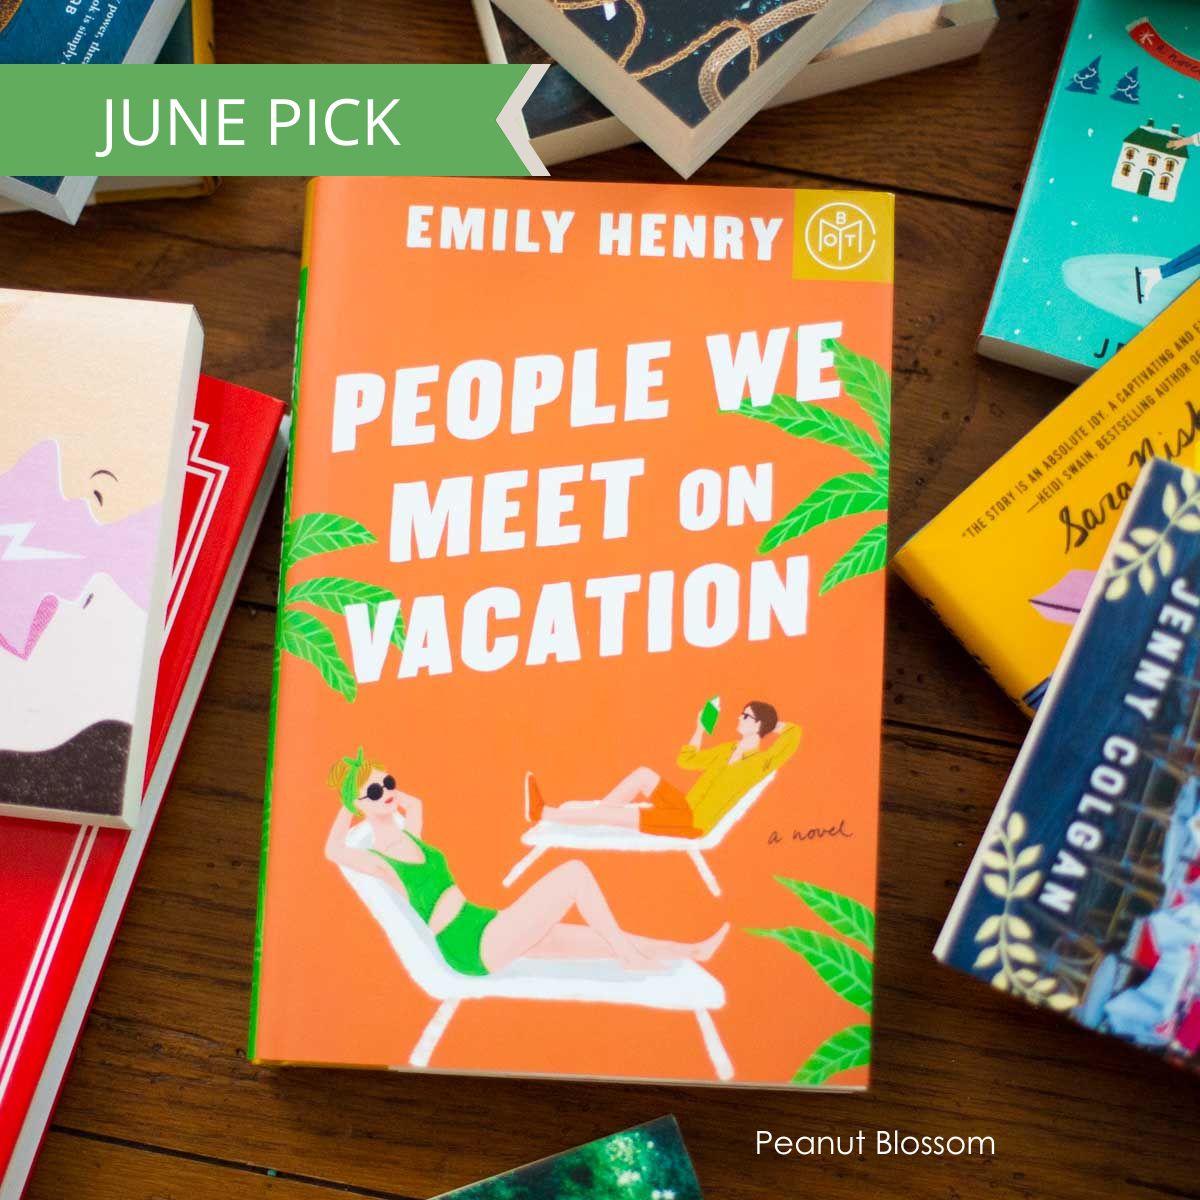 A copy of the book People We Meet on Vacation by Emily Henry sits on a table.